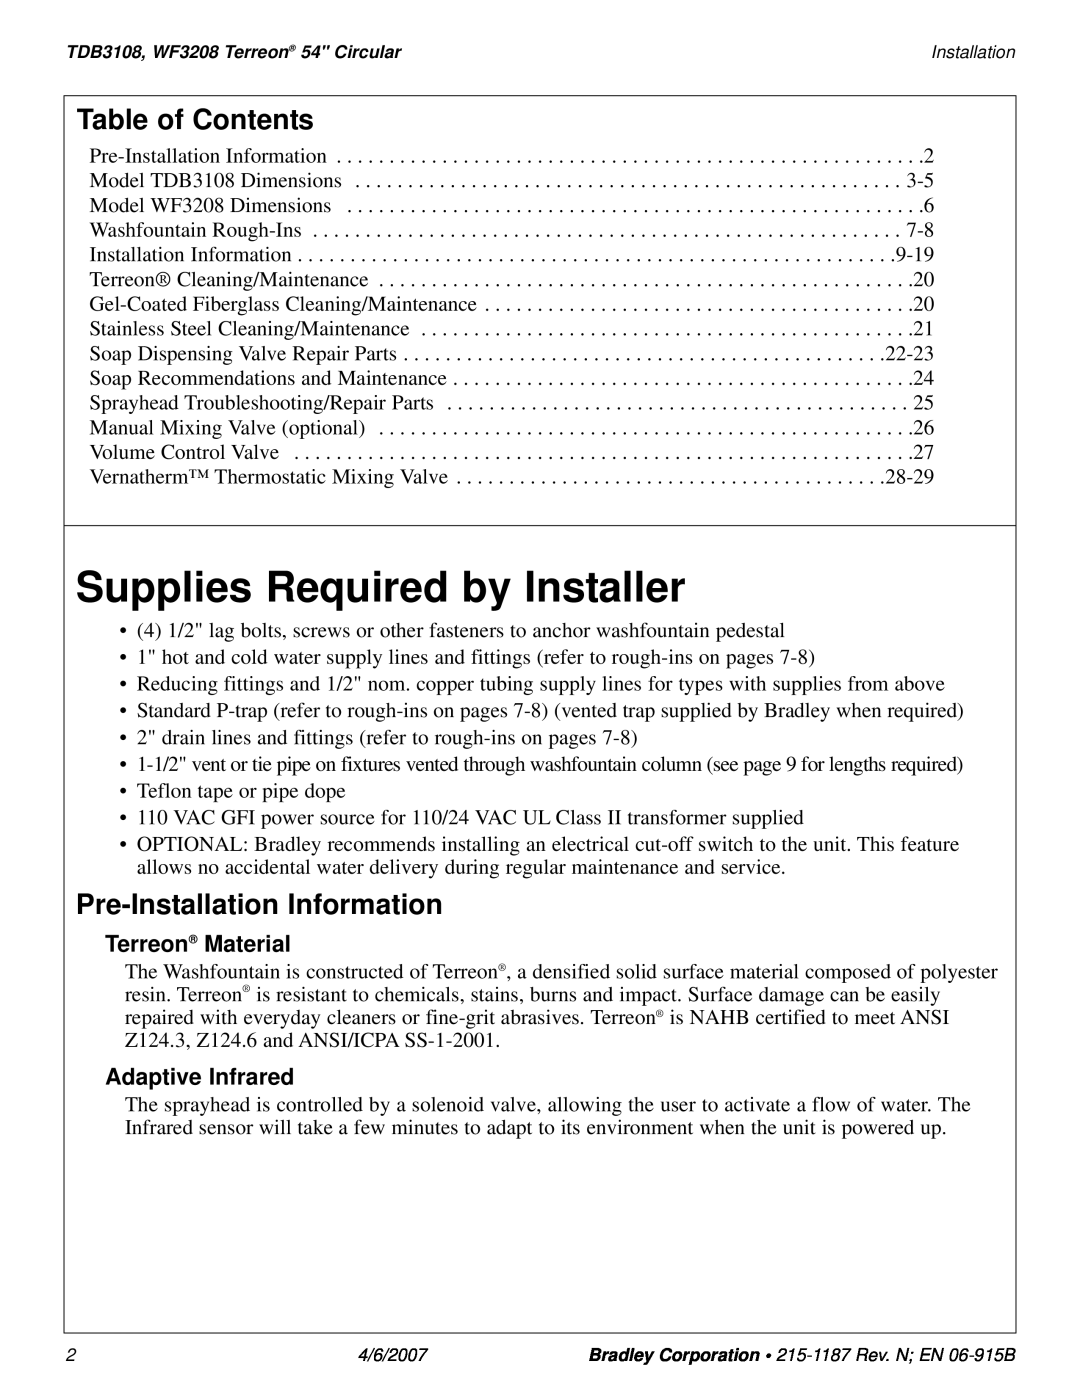 Bradley Smoker TDB3108 Supplies Required by Installer, Table of Contents, Pre-Installation Information, Terreon Material 